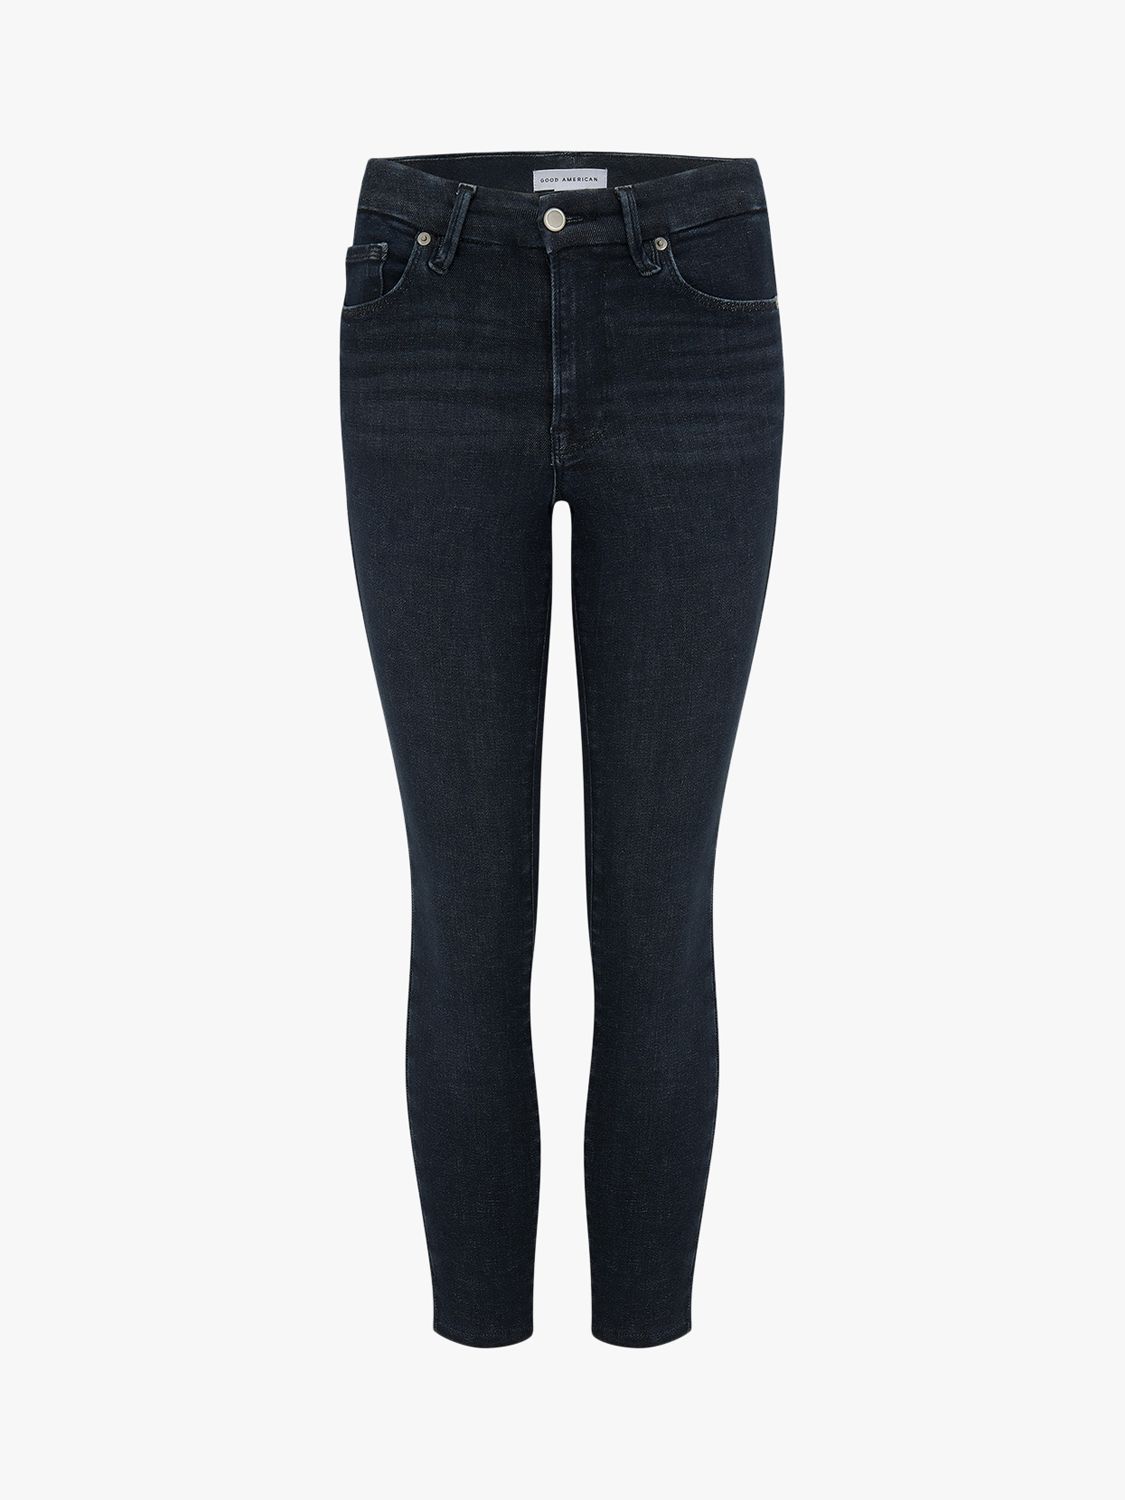 Get the jeans for 35£ at Asos UK - Wheretoget